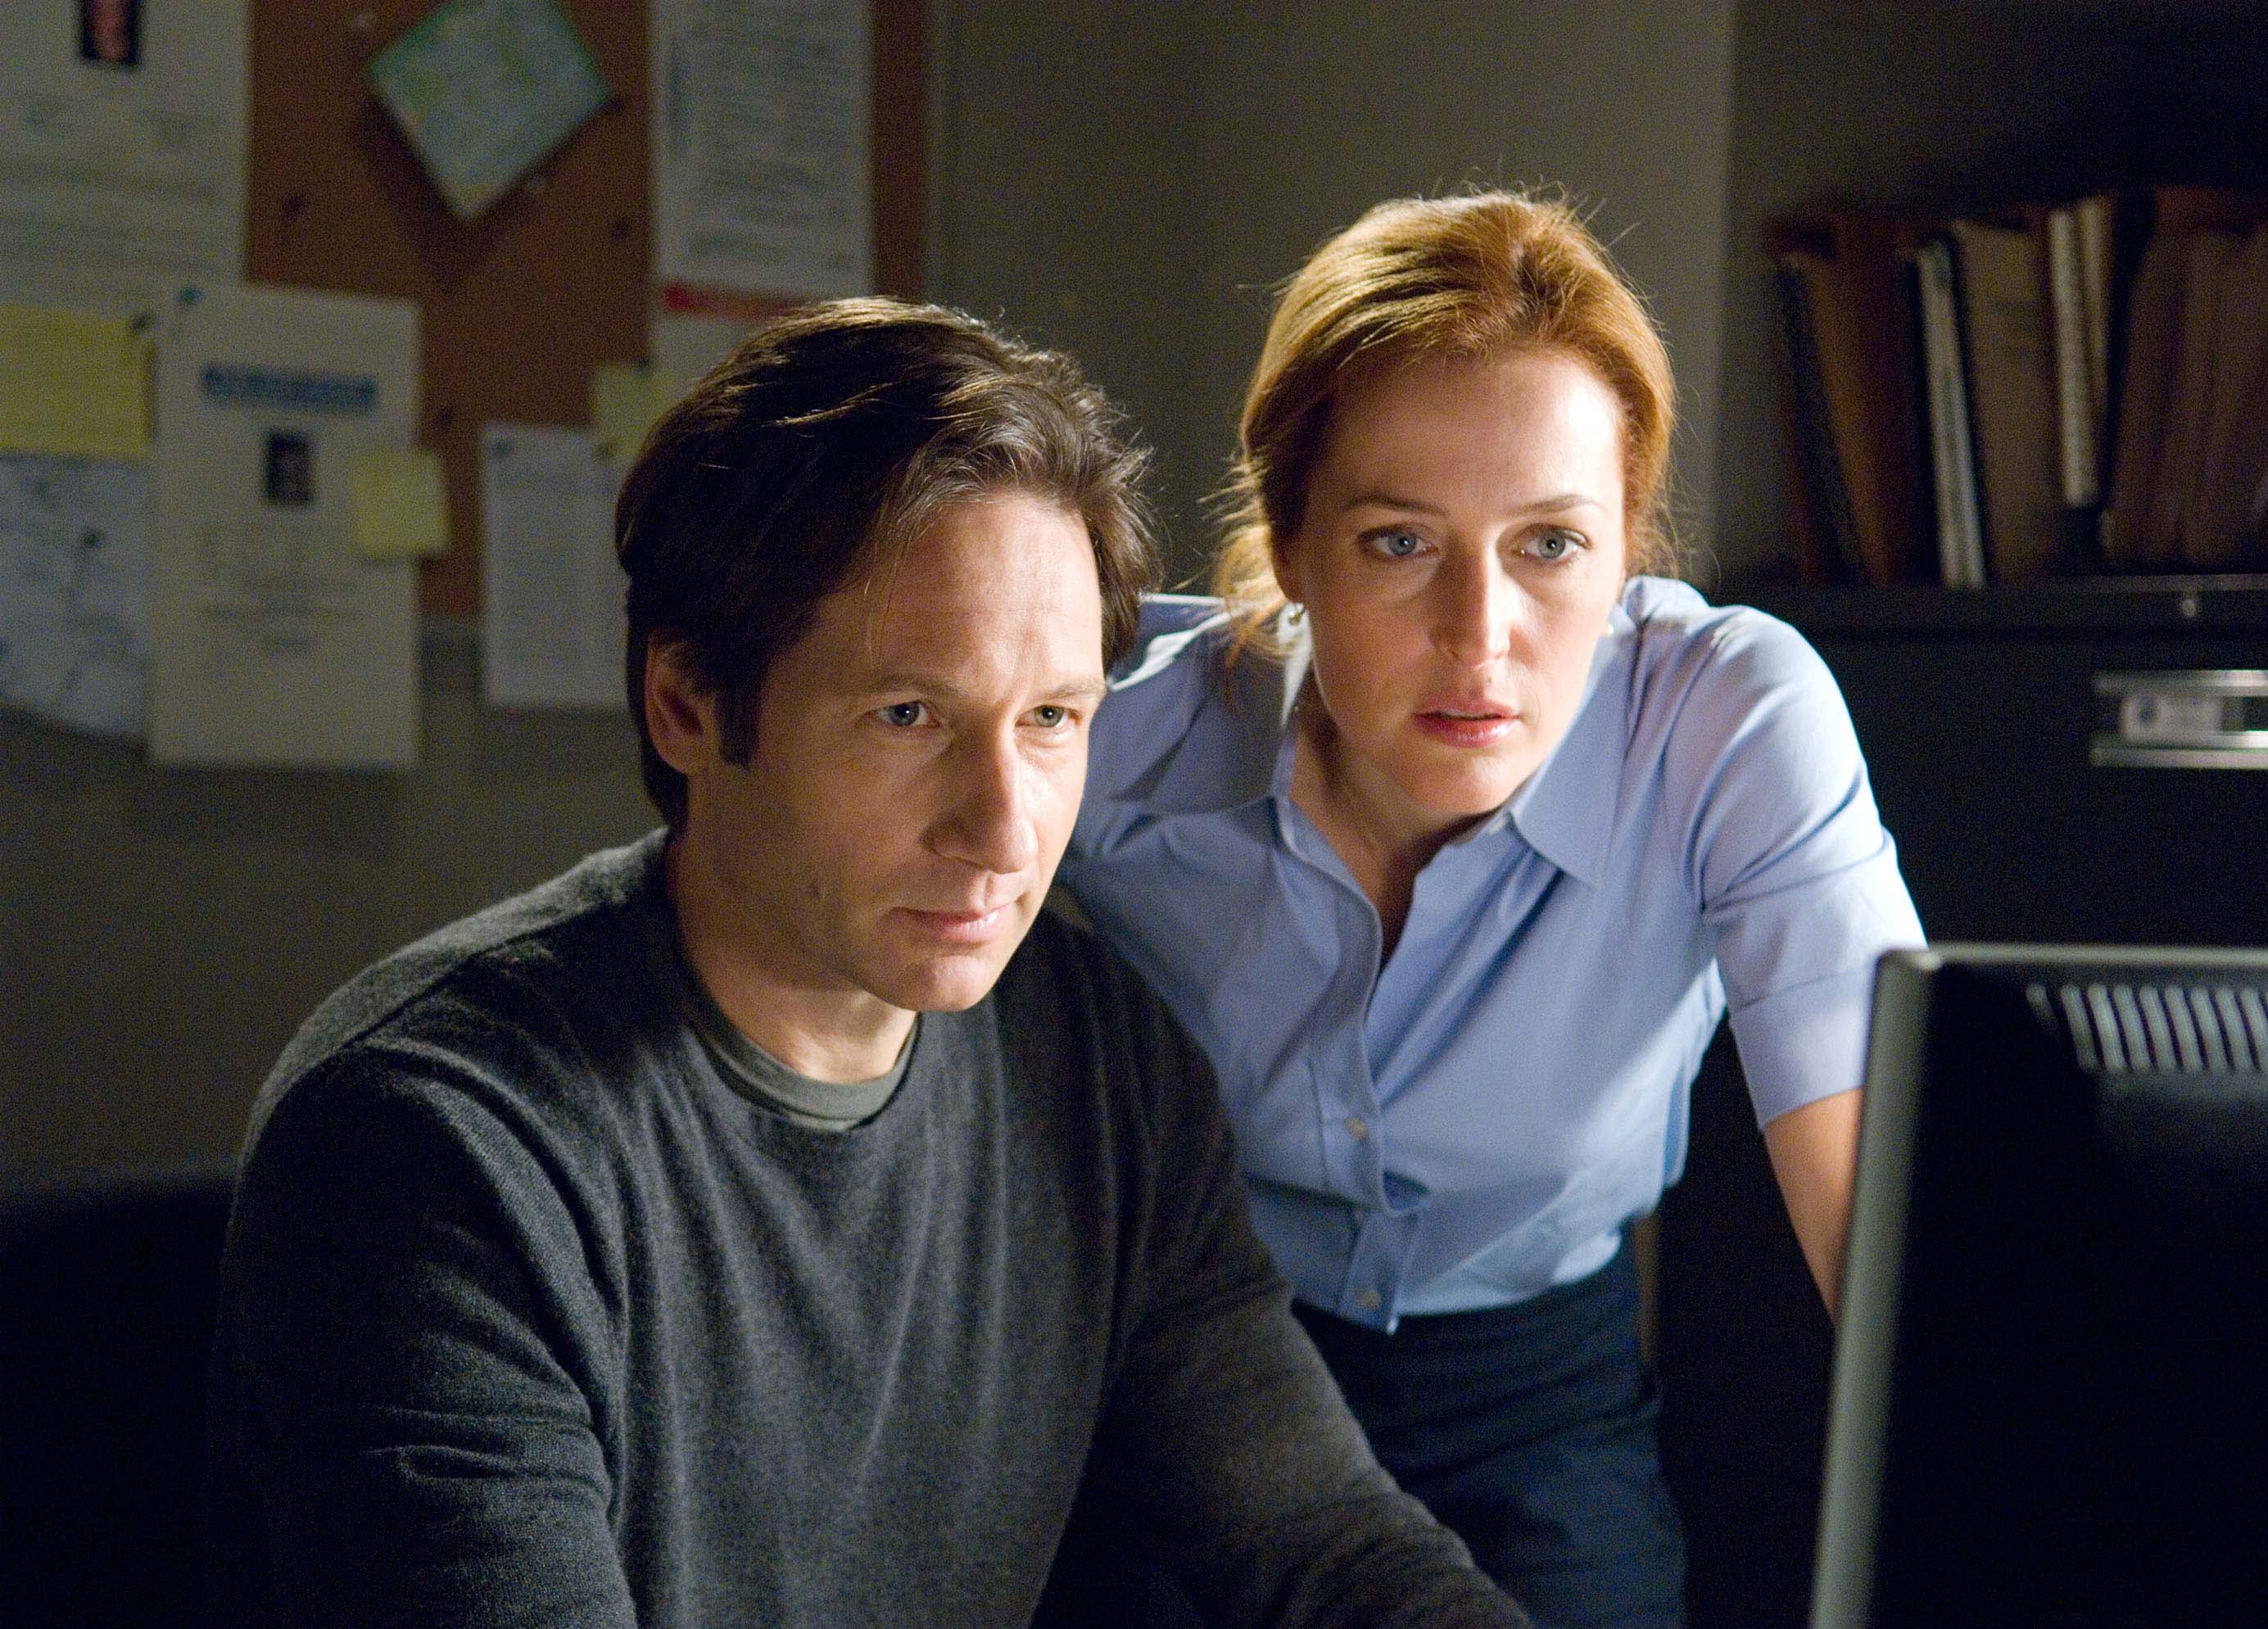 David Duchovny (L) and Gillian Anderson (R) are shown in a scene from, "The X-Files: I Want to Believe." (Diyah Pera—AP)